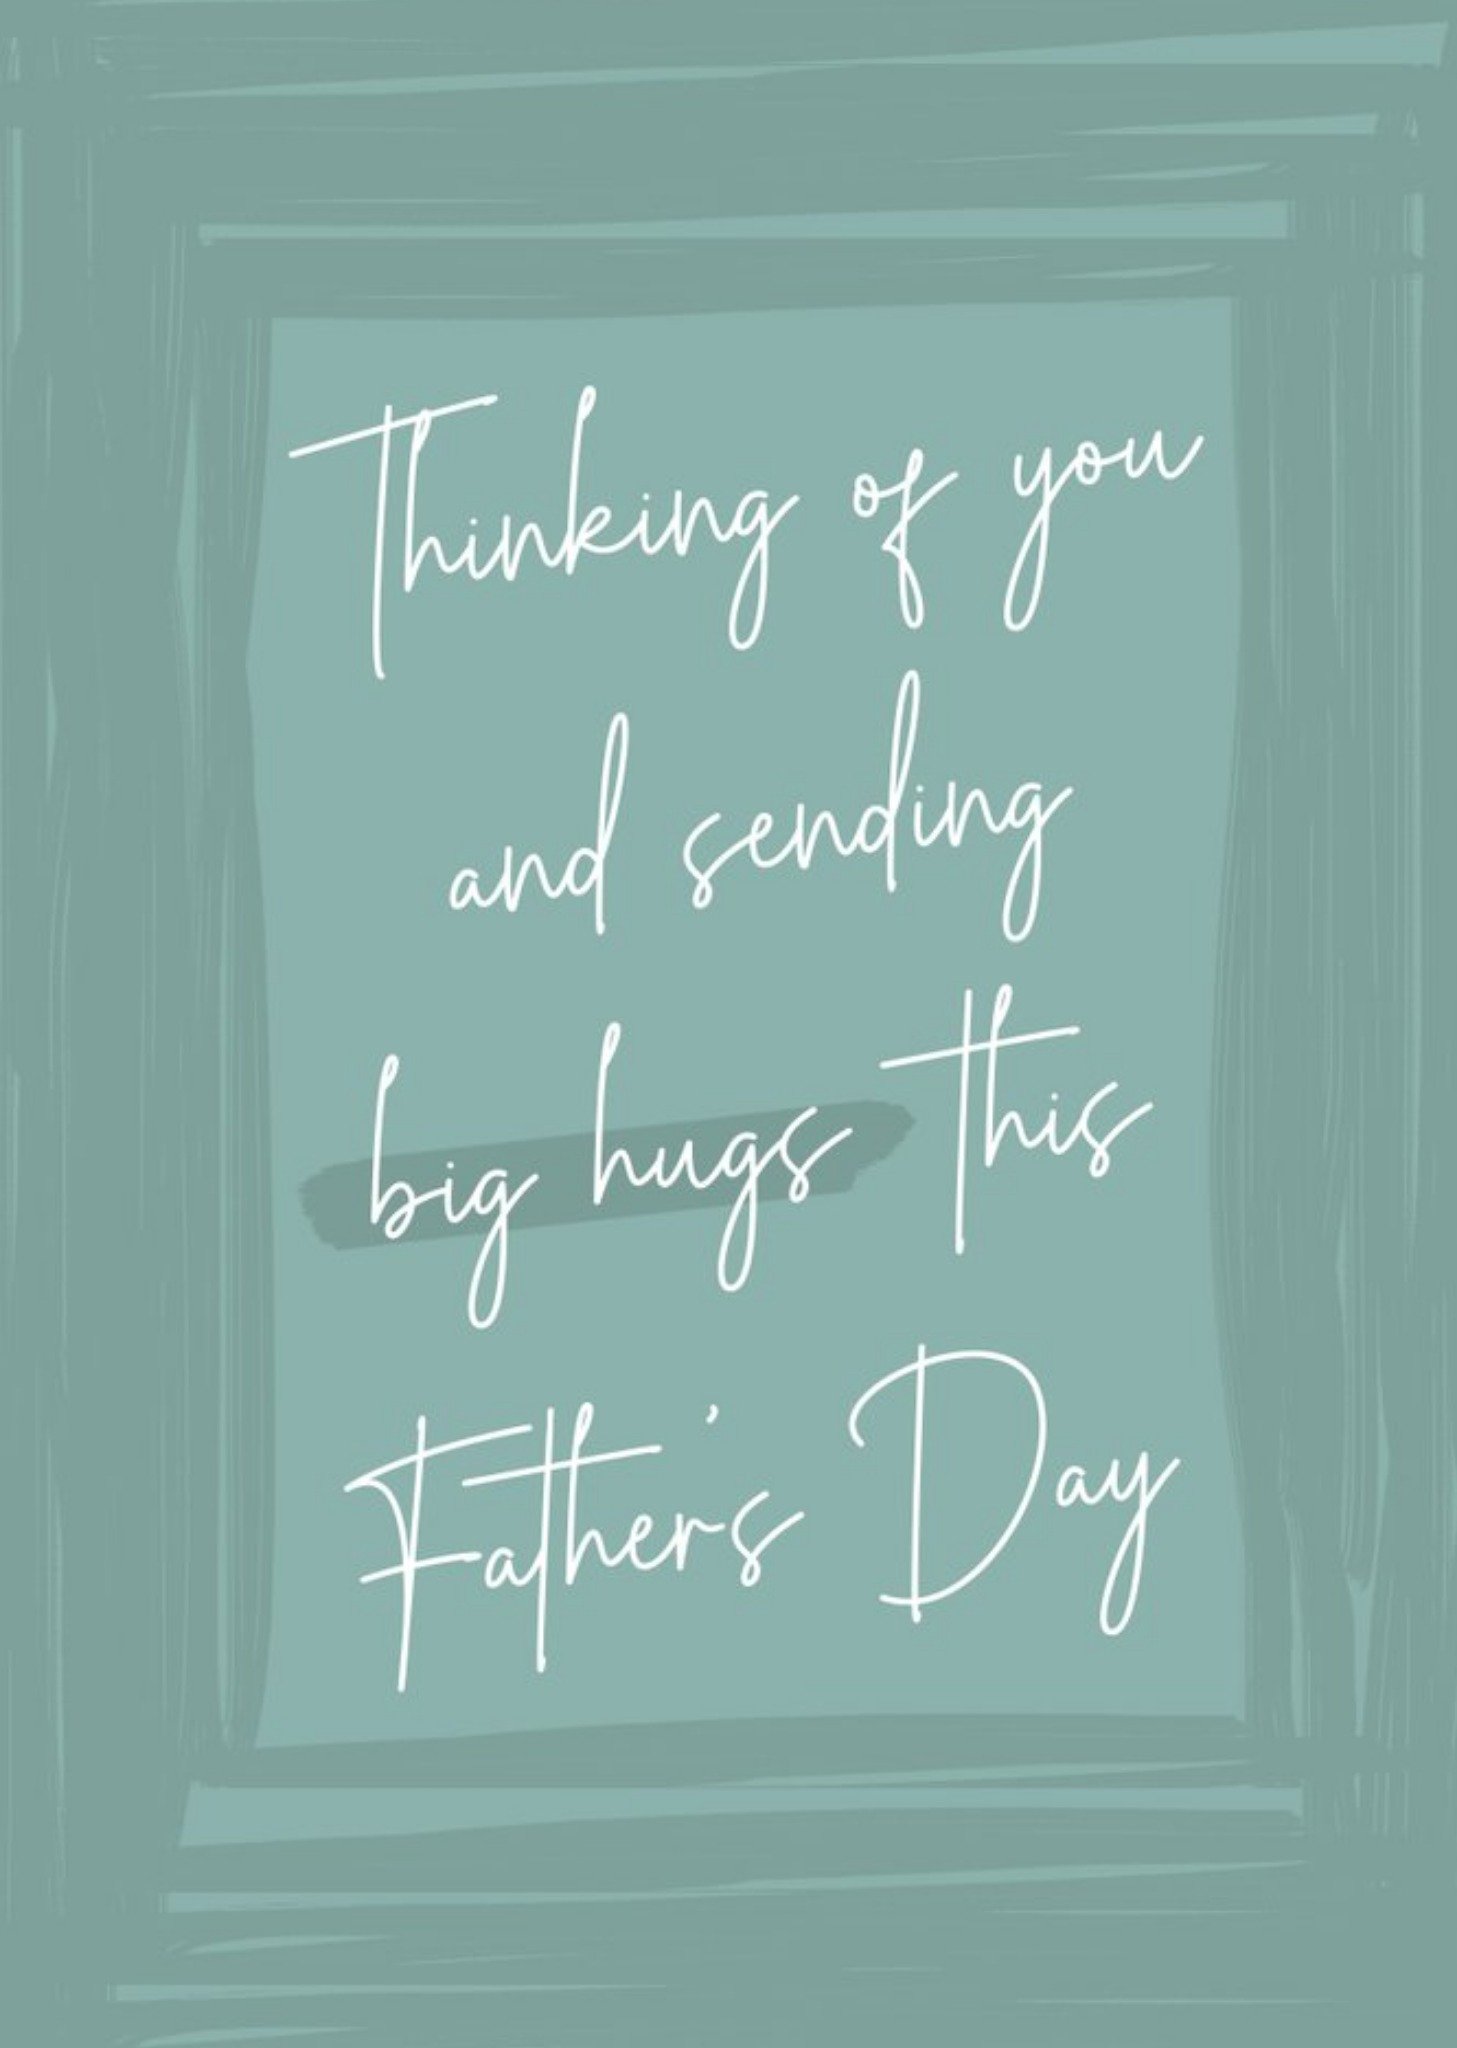 Moonpig Sending Big Hugs Thinking Of You This Father's Day Card, Large